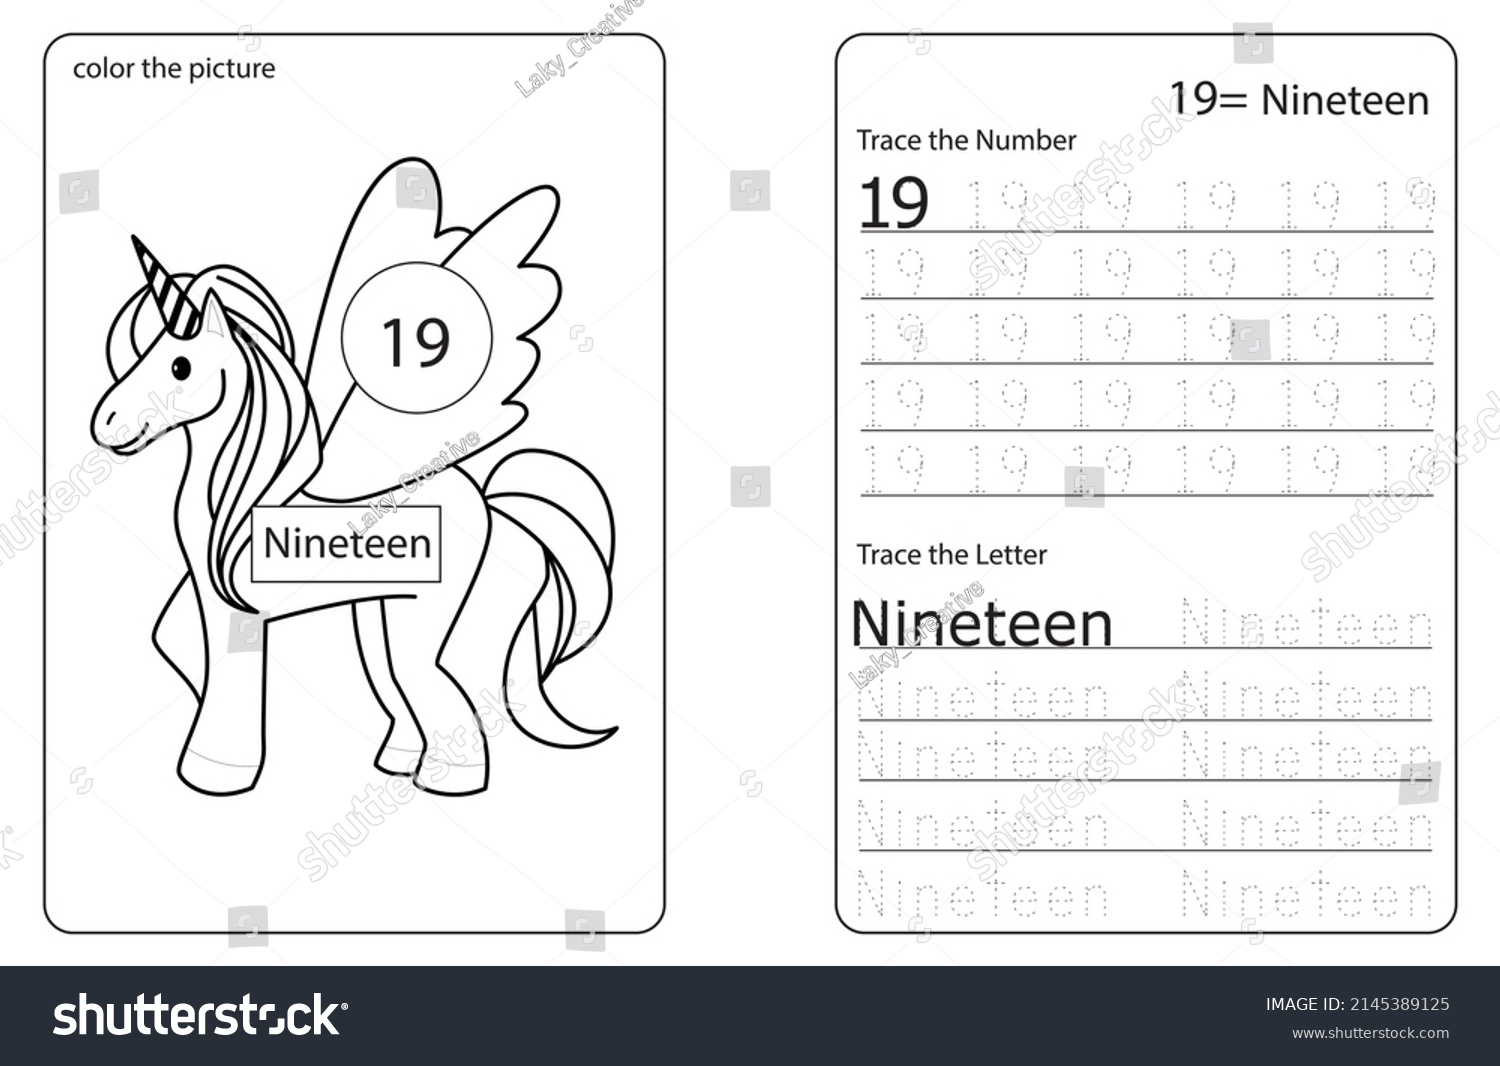 Unicorn cute number colouring tracing activity stock vector royalty free